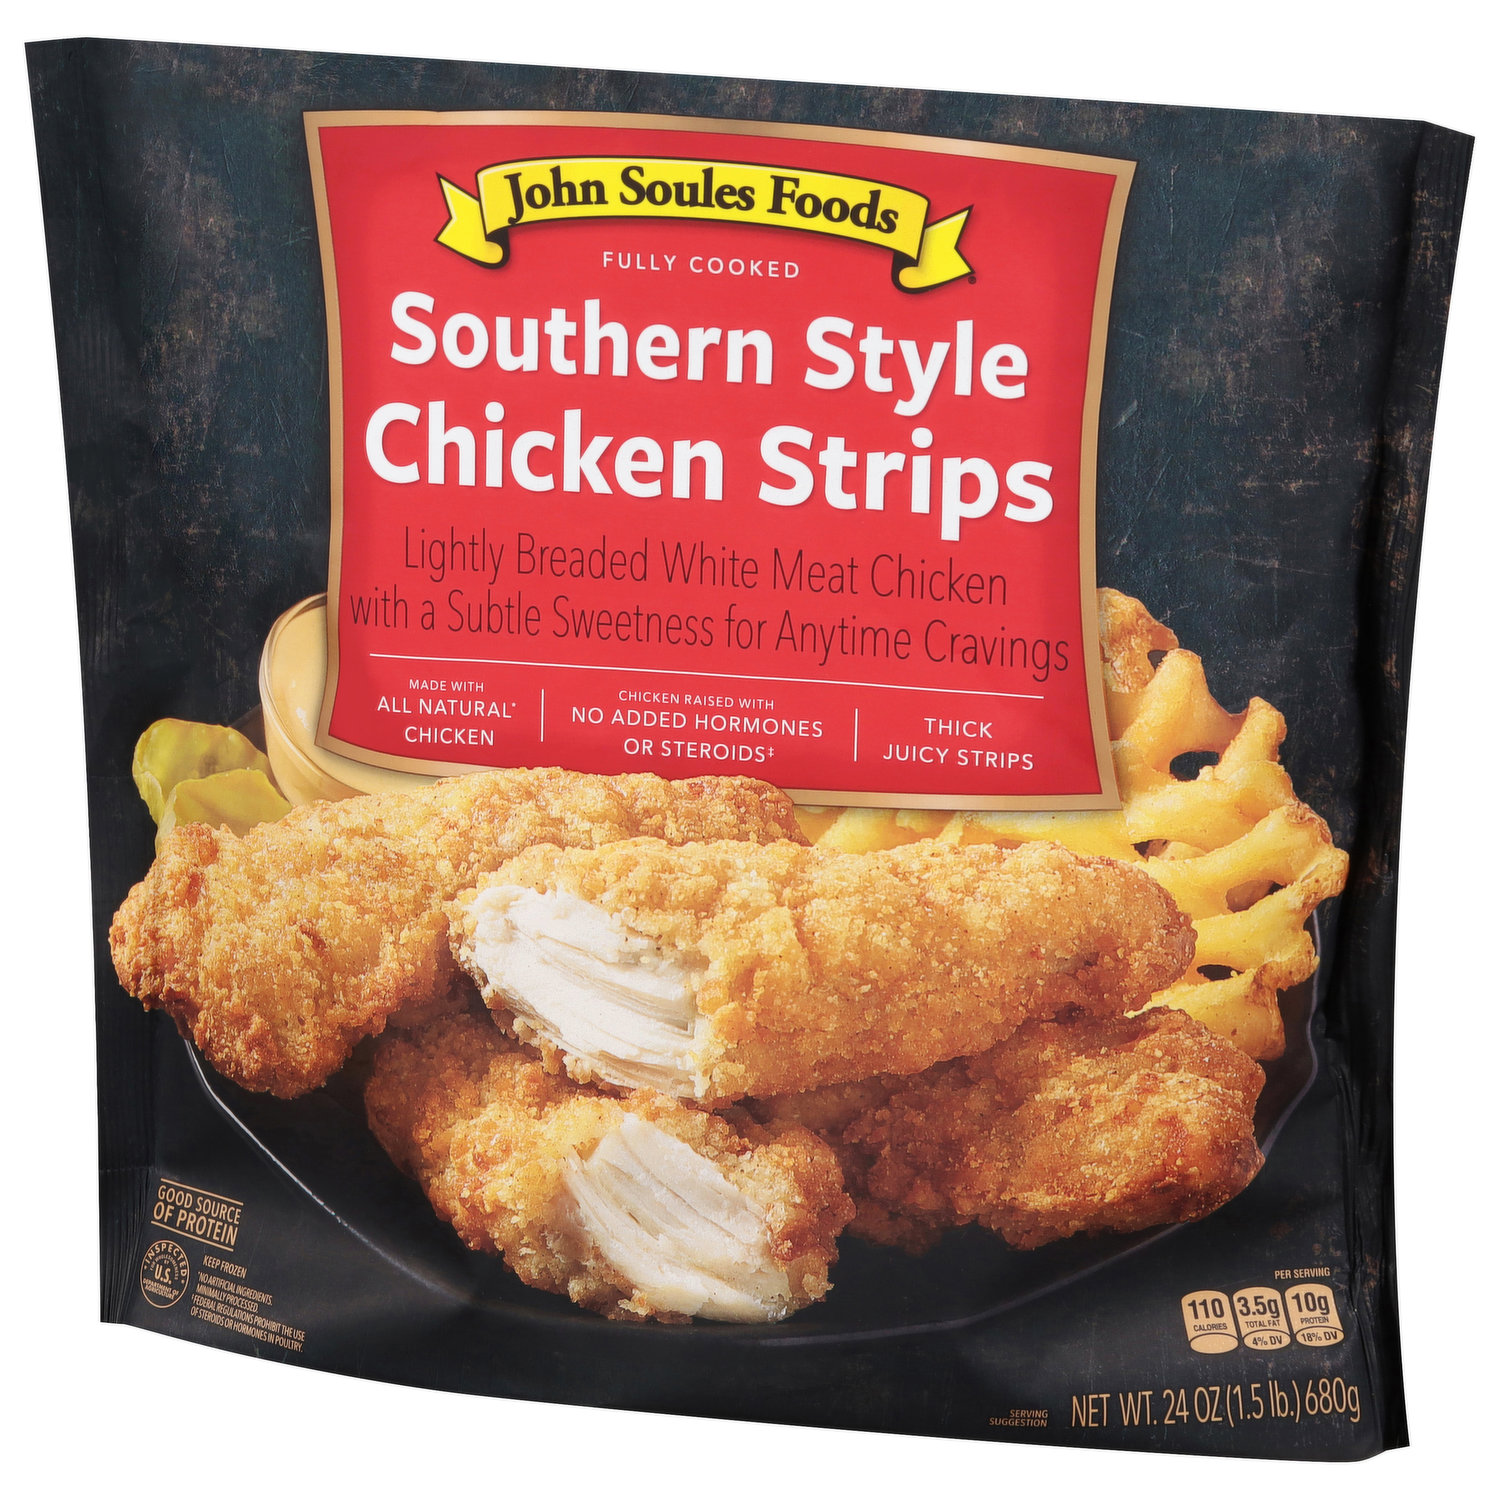 John Strips, Foods Chicken Soules Southern Style